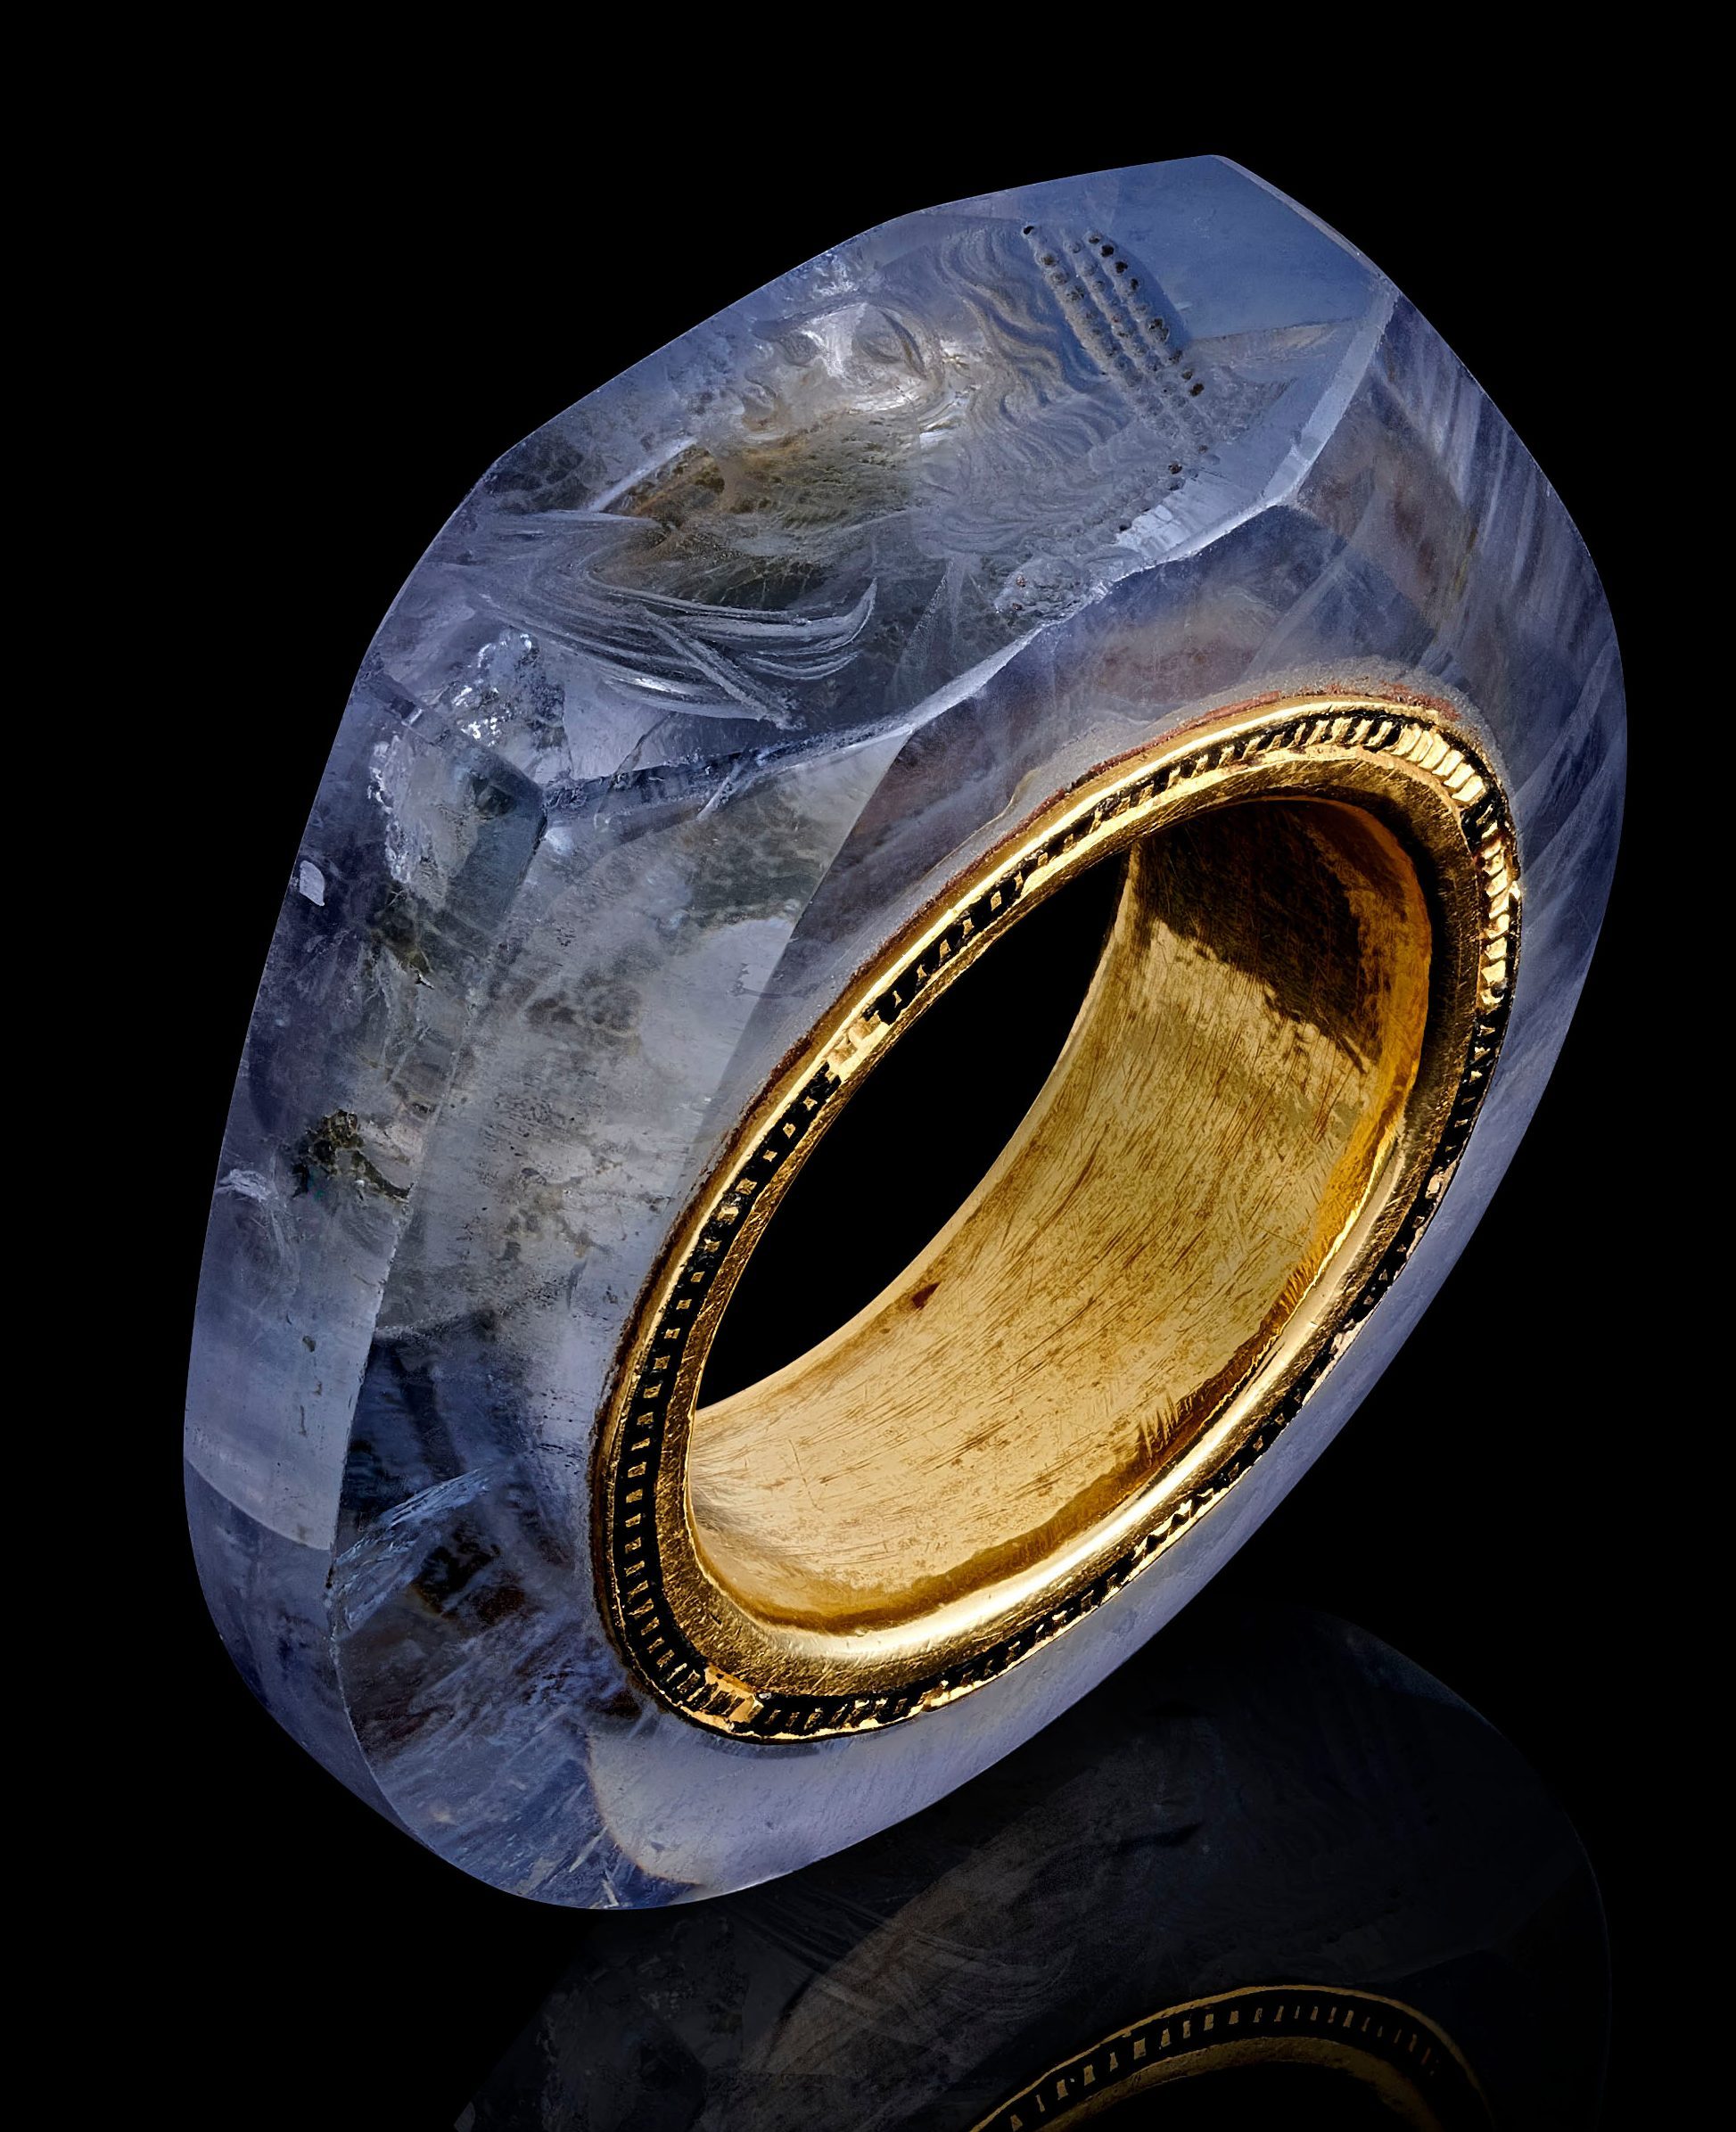 The History Blog » Blog Archive » Sapphire ring maybe worn by Caligula